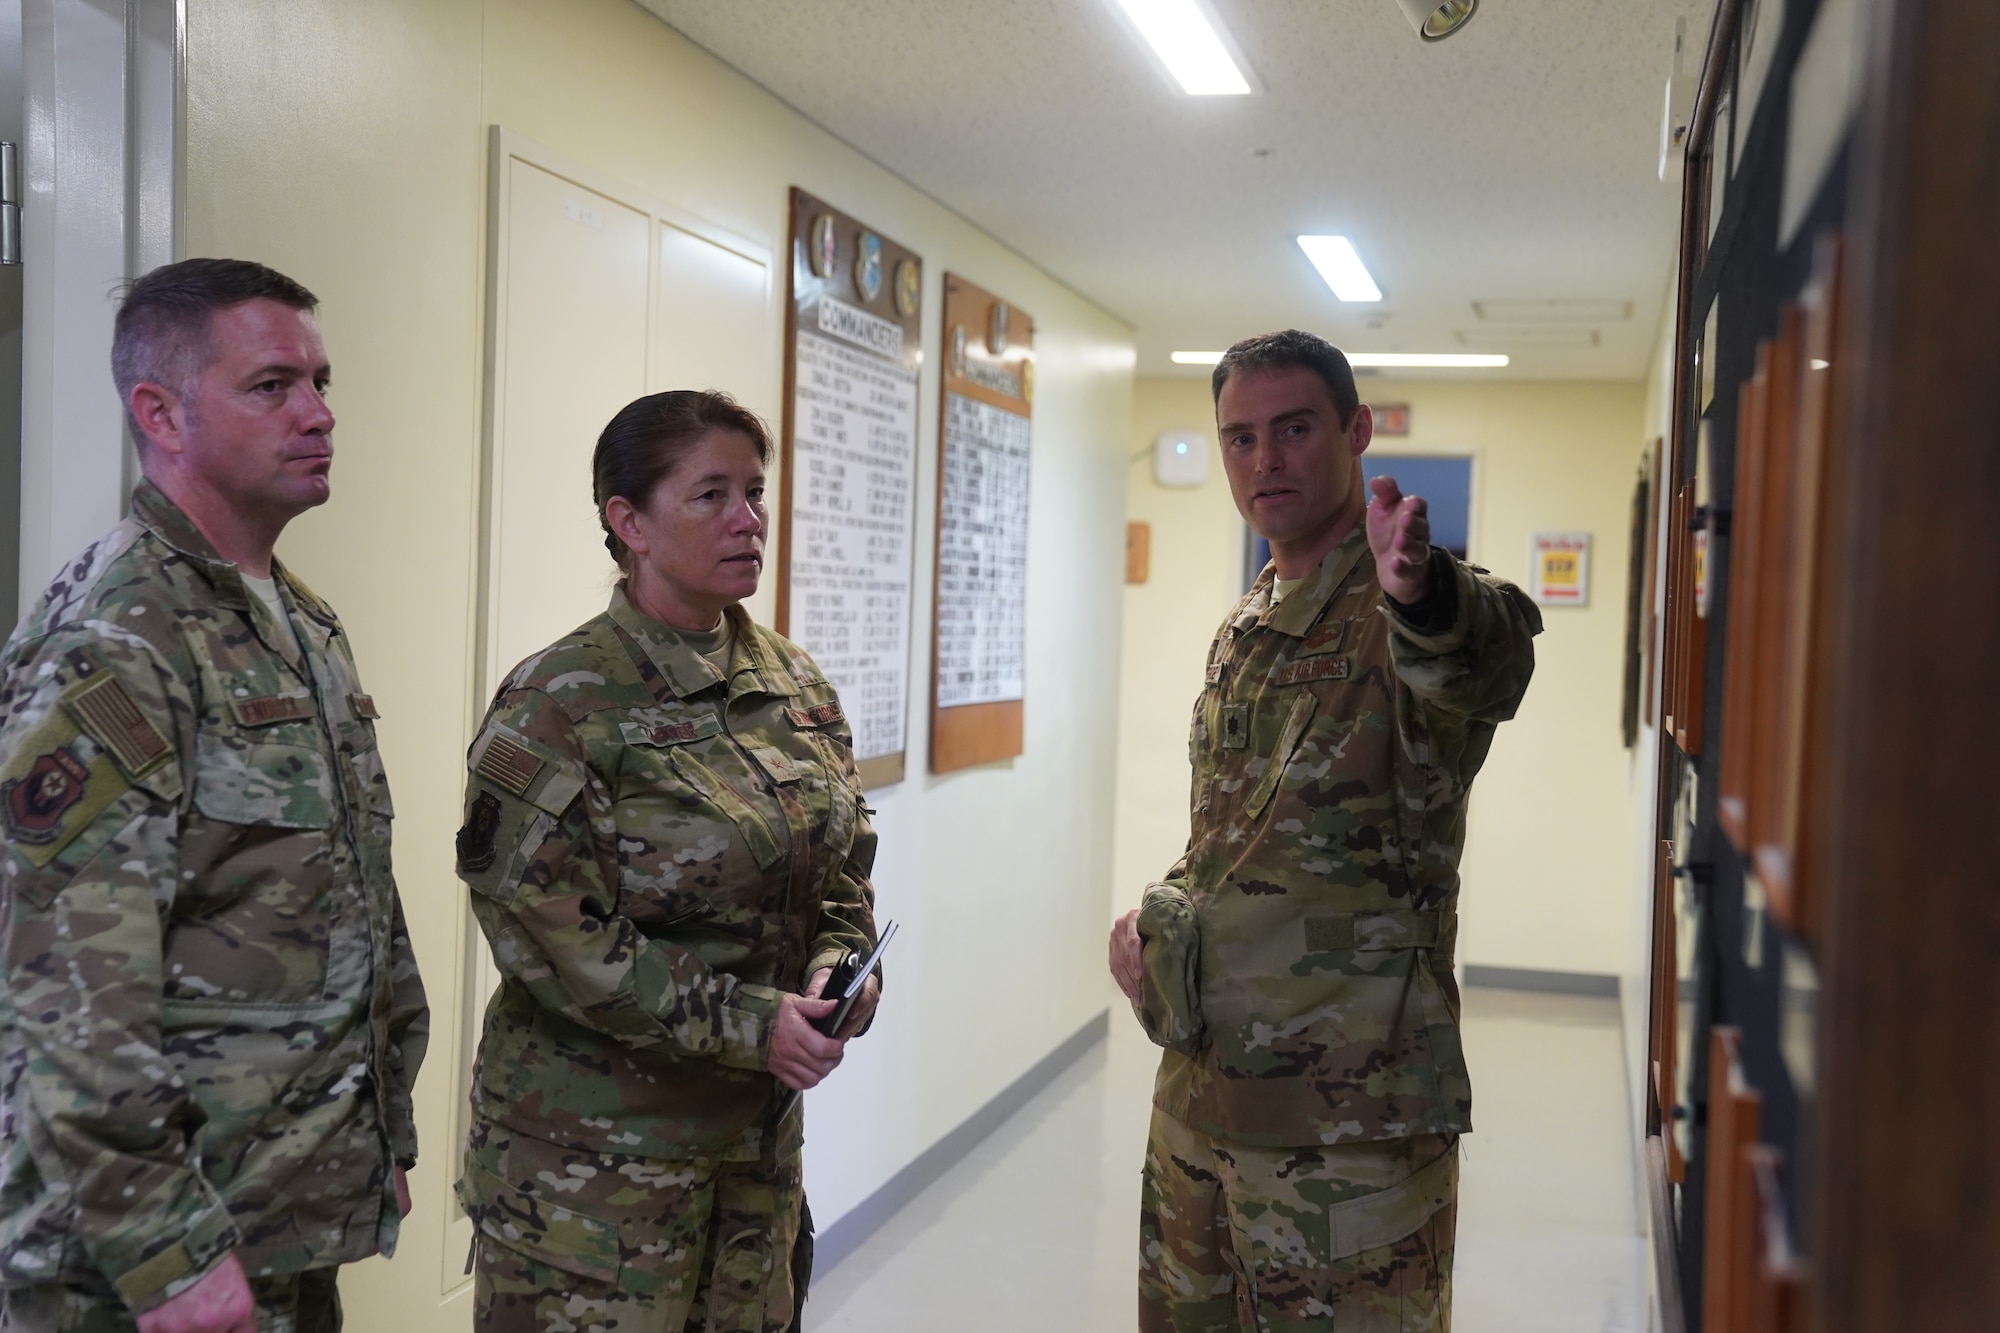 Brig. Gen. Brenda Cartier, Air Force Special Operations Command director of operations, and Chief Master Sgt. Christian Hendrick AFSOC operations chief enlisted member, visited the 353rd SOG as part of an INDOPACOM immersion visit.